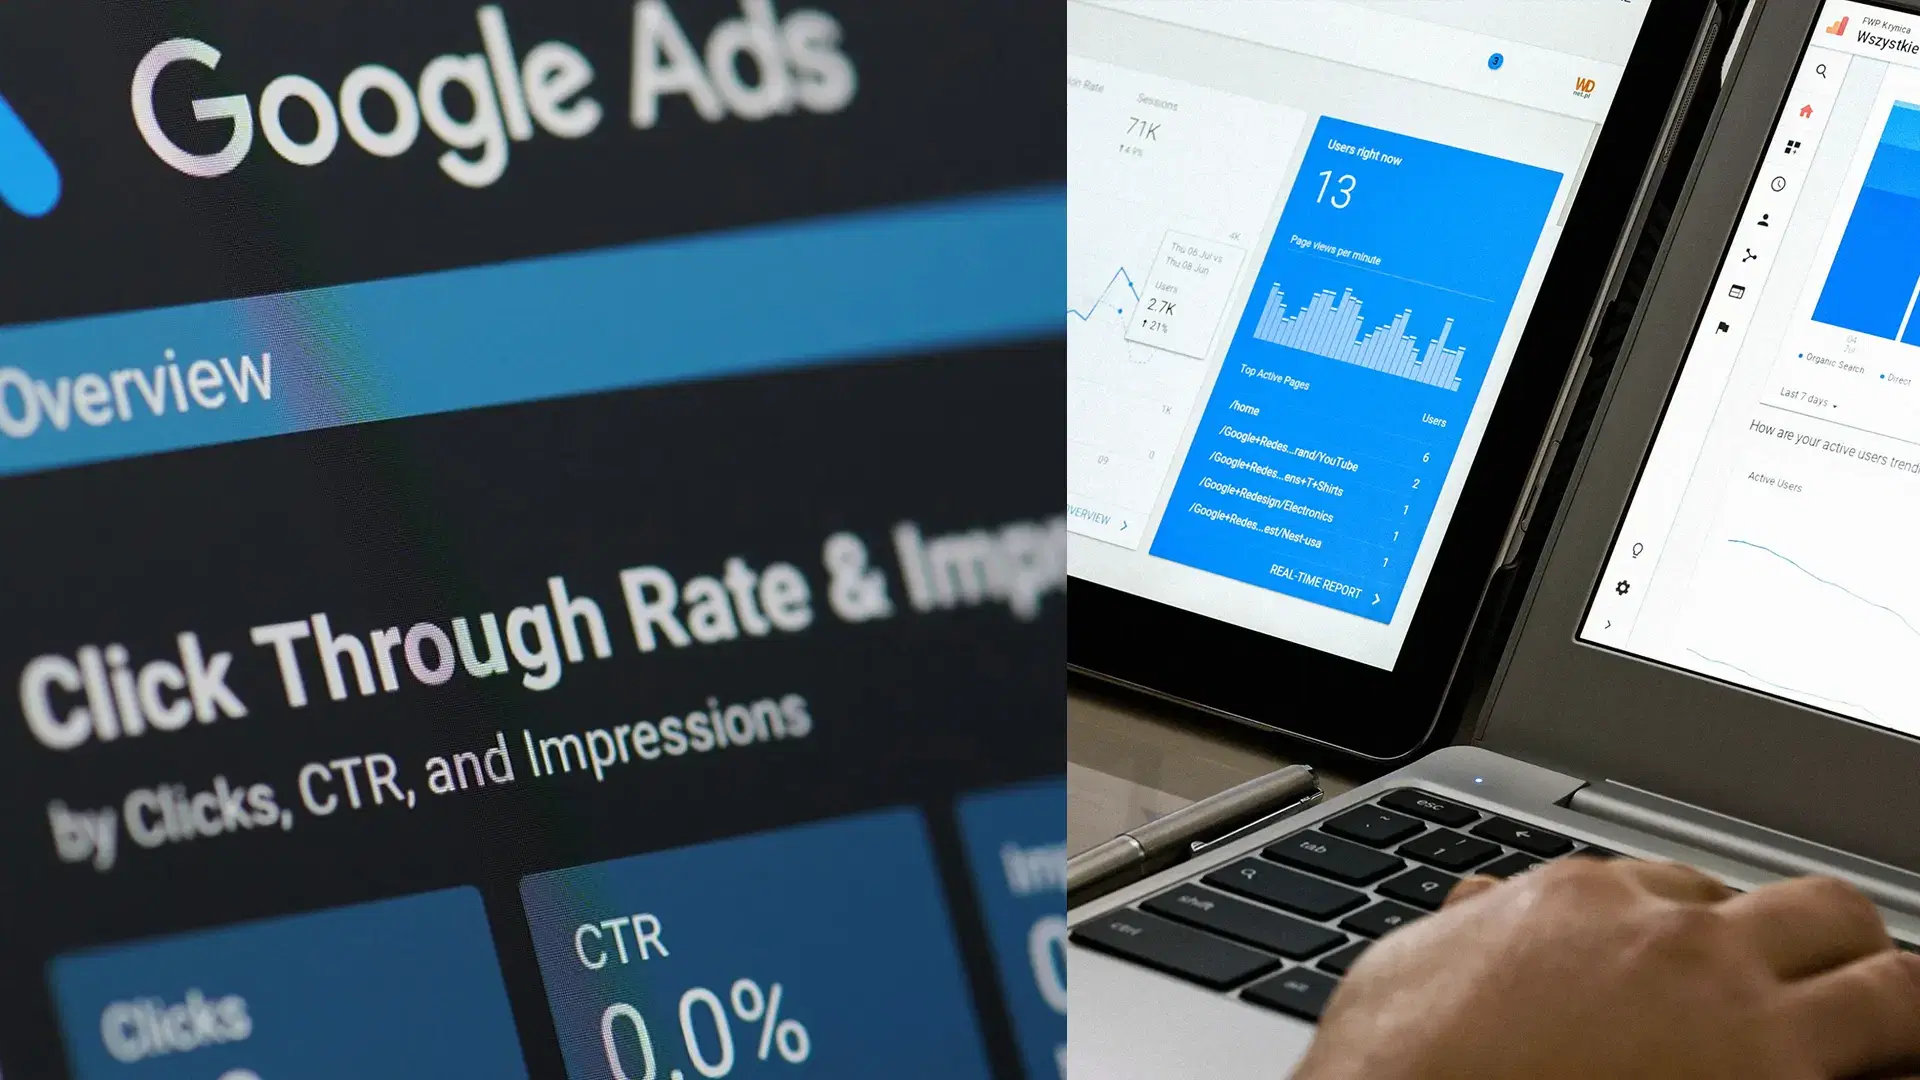 Google Ads advertising agency and account management